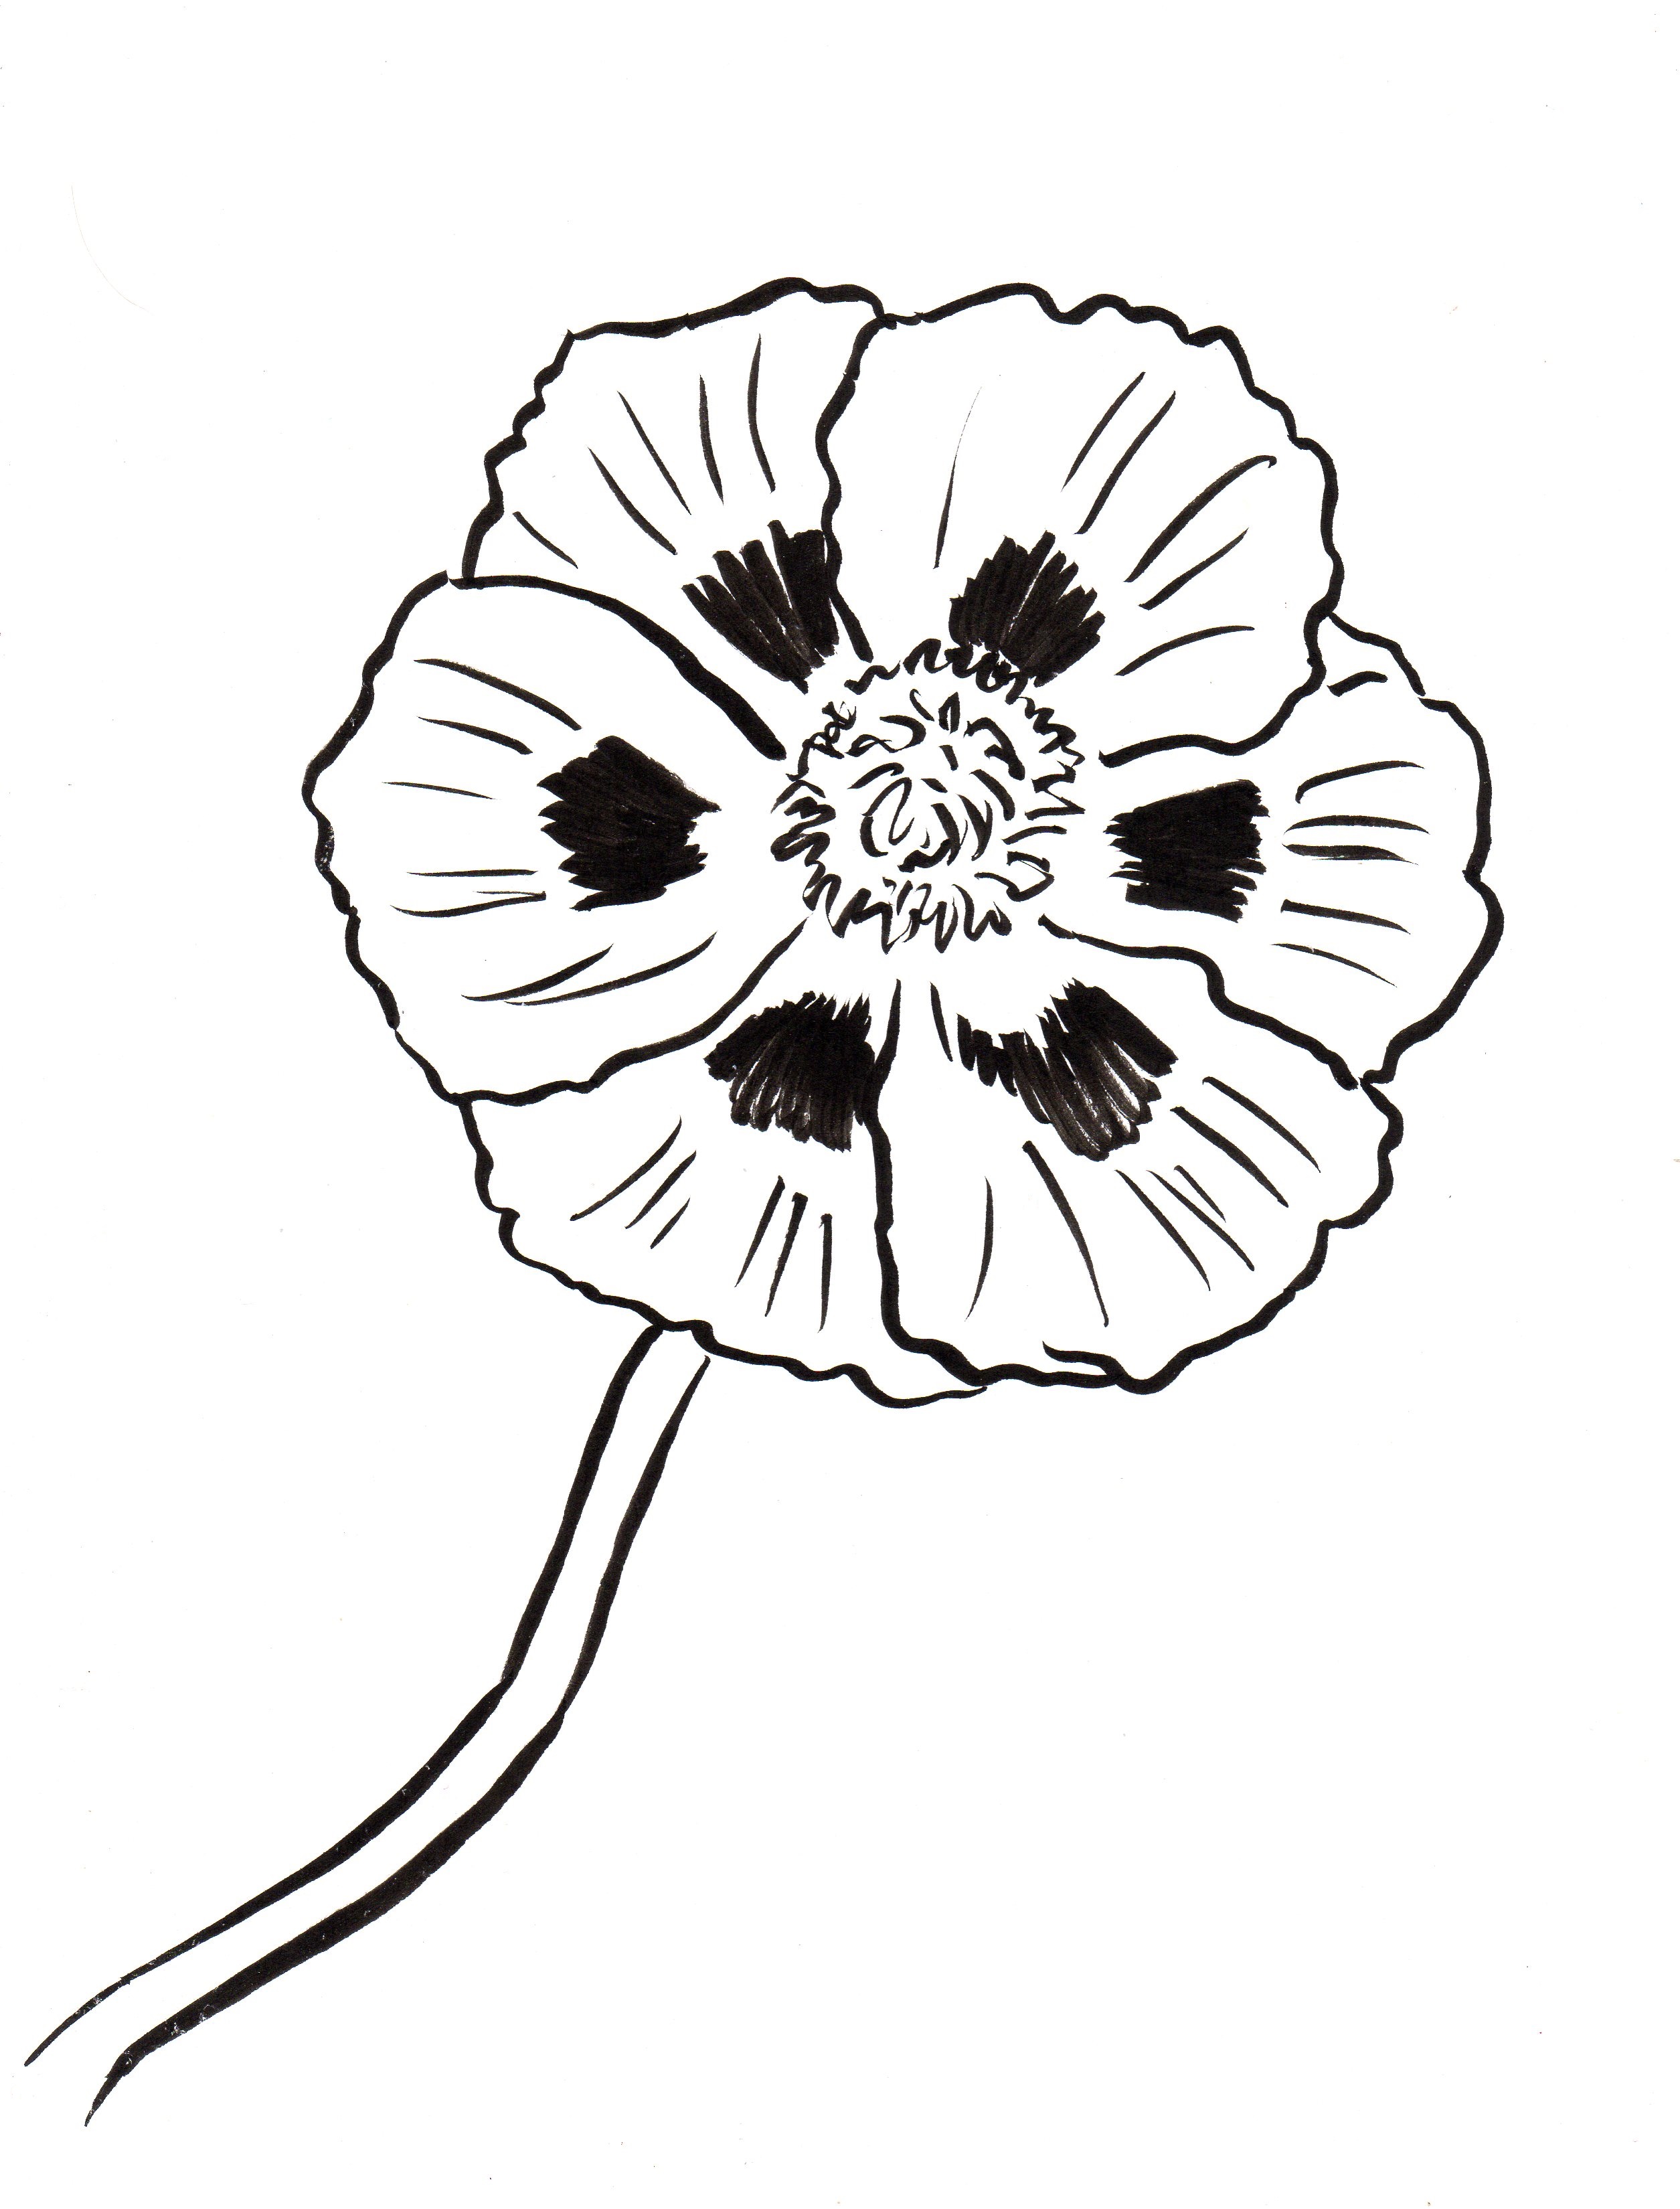 Poppy Coloring Page - Art Starts